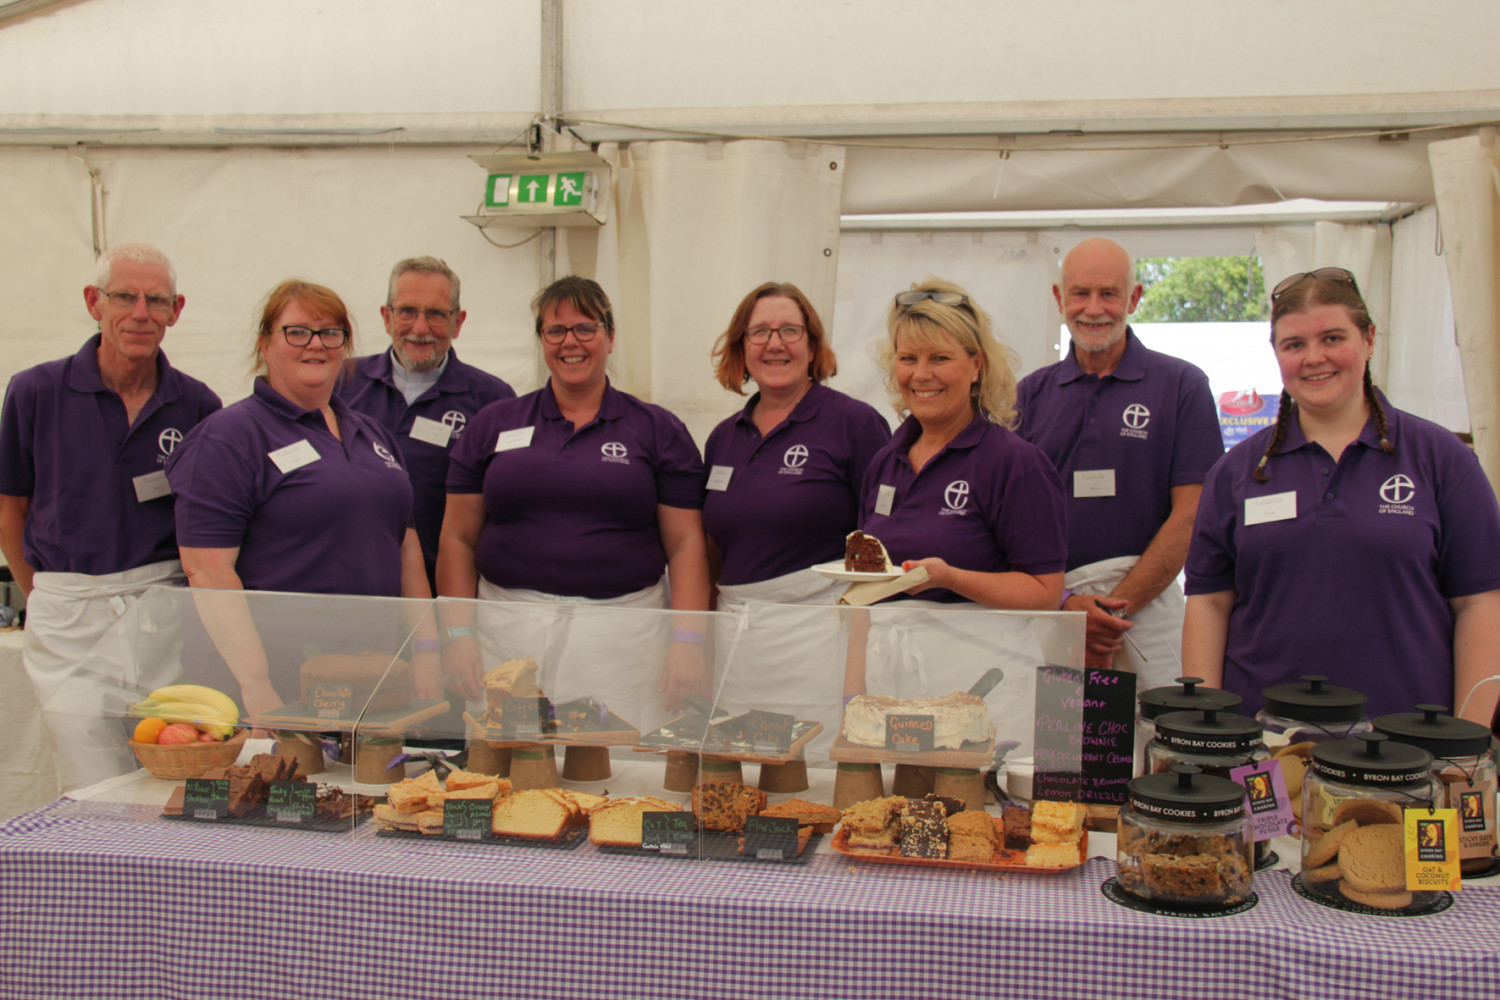 the cafe team at the church tent